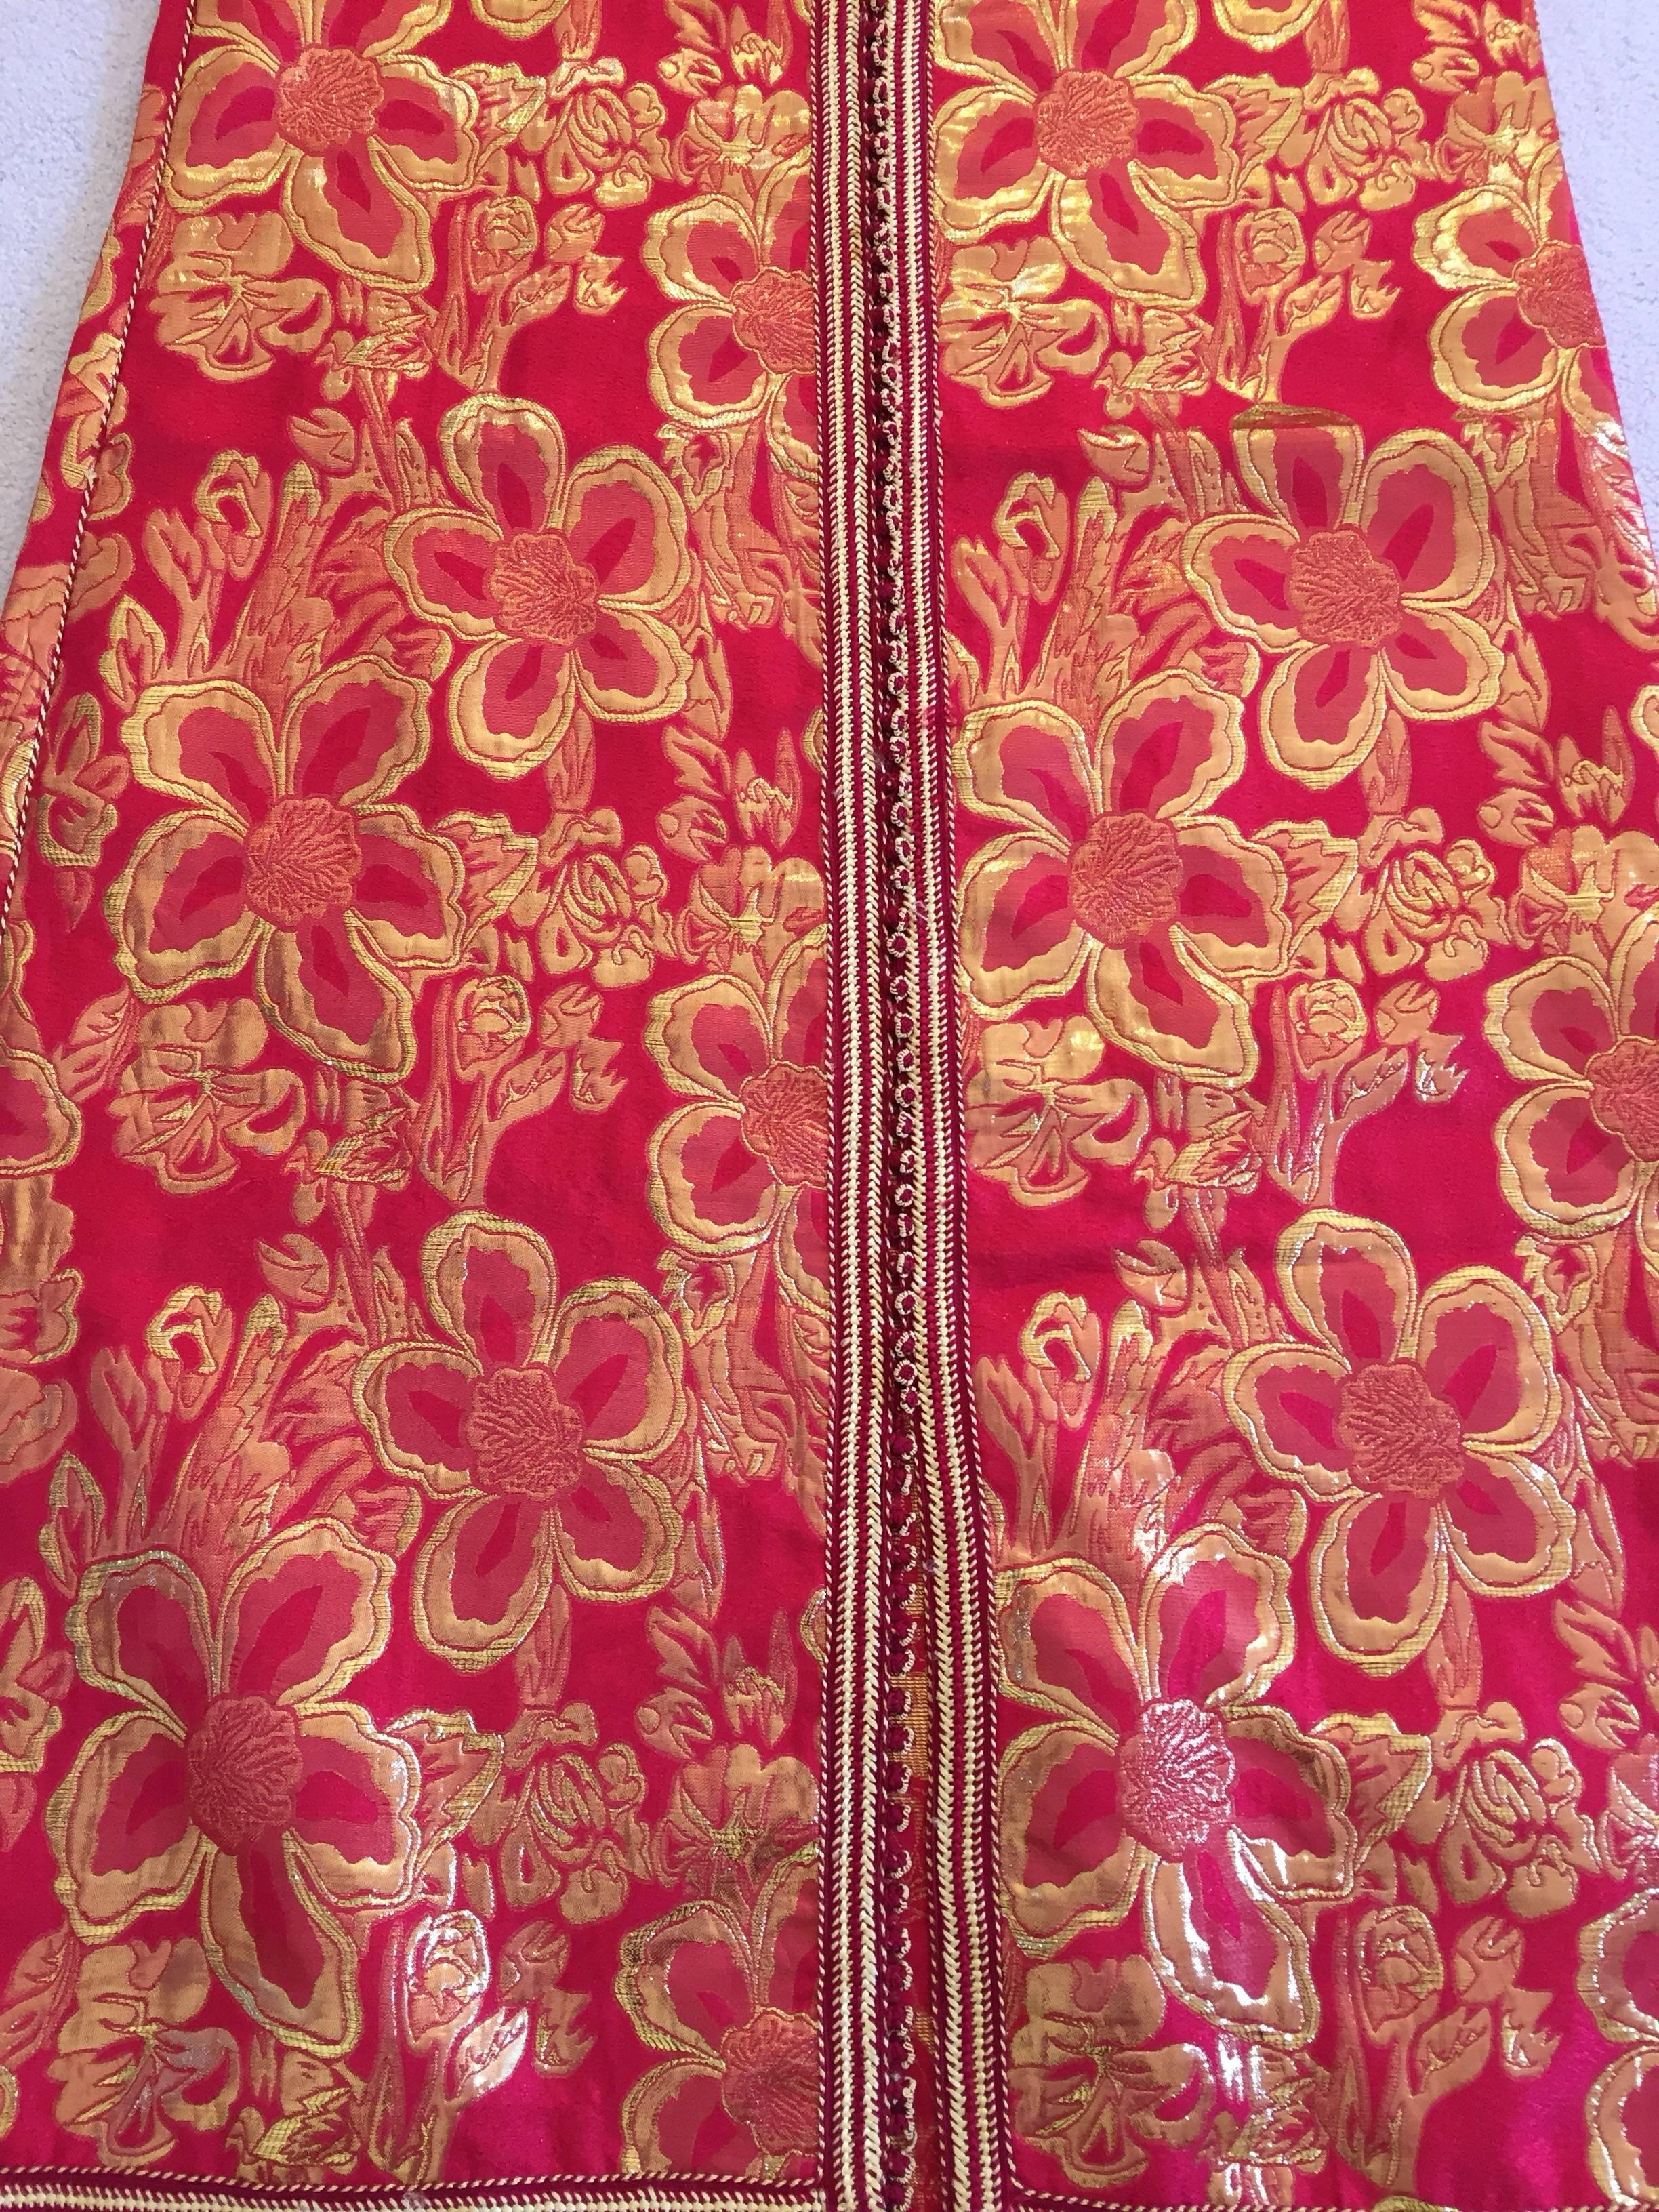 20th Century Vintage Moroccan Kaftan 1970s Red and Gold Floral Brocade Caftan Maxi Dress For Sale